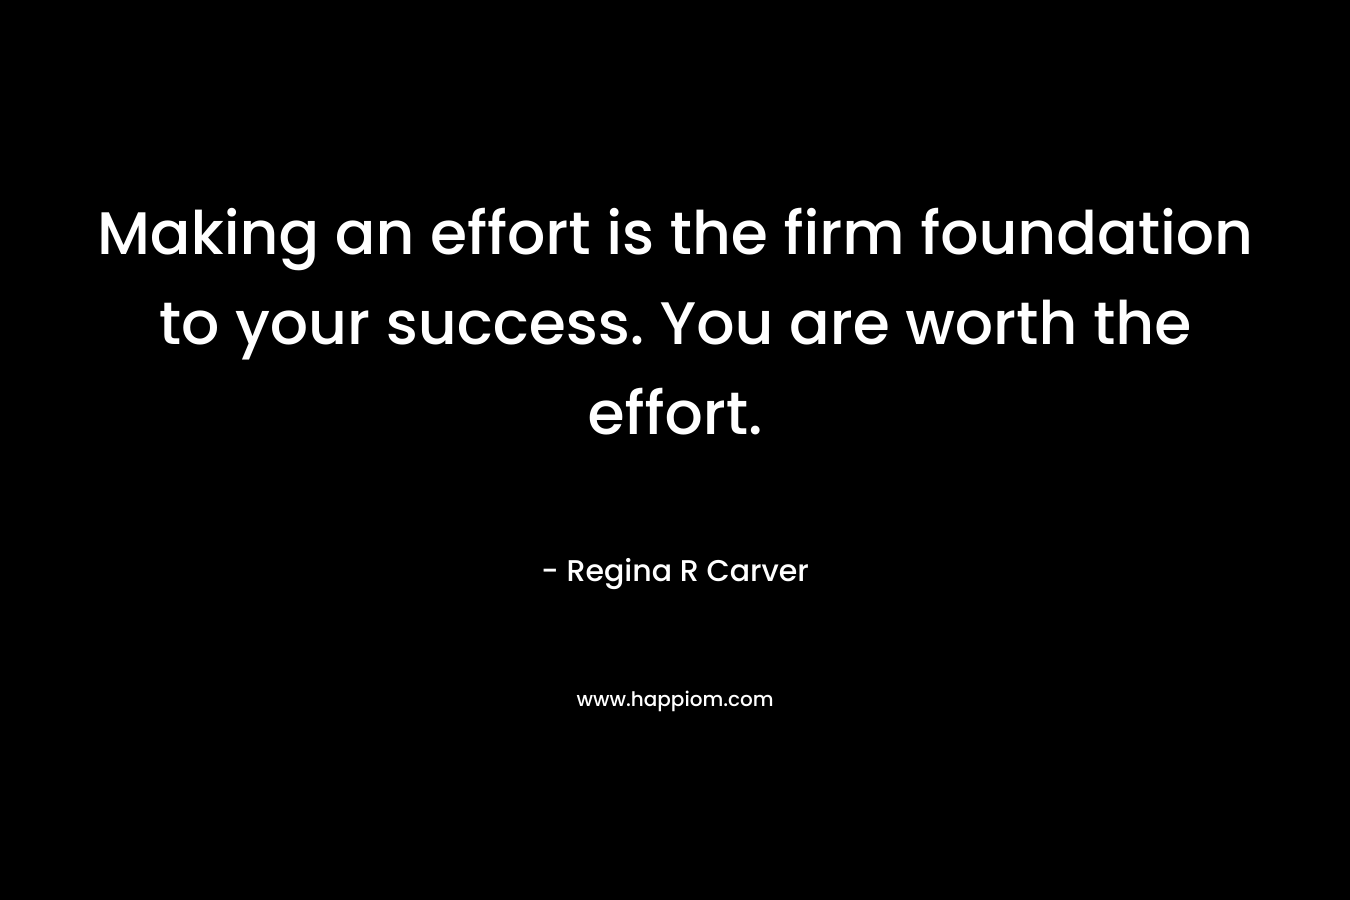 Making an effort is the firm foundation to your success. You are worth the effort.